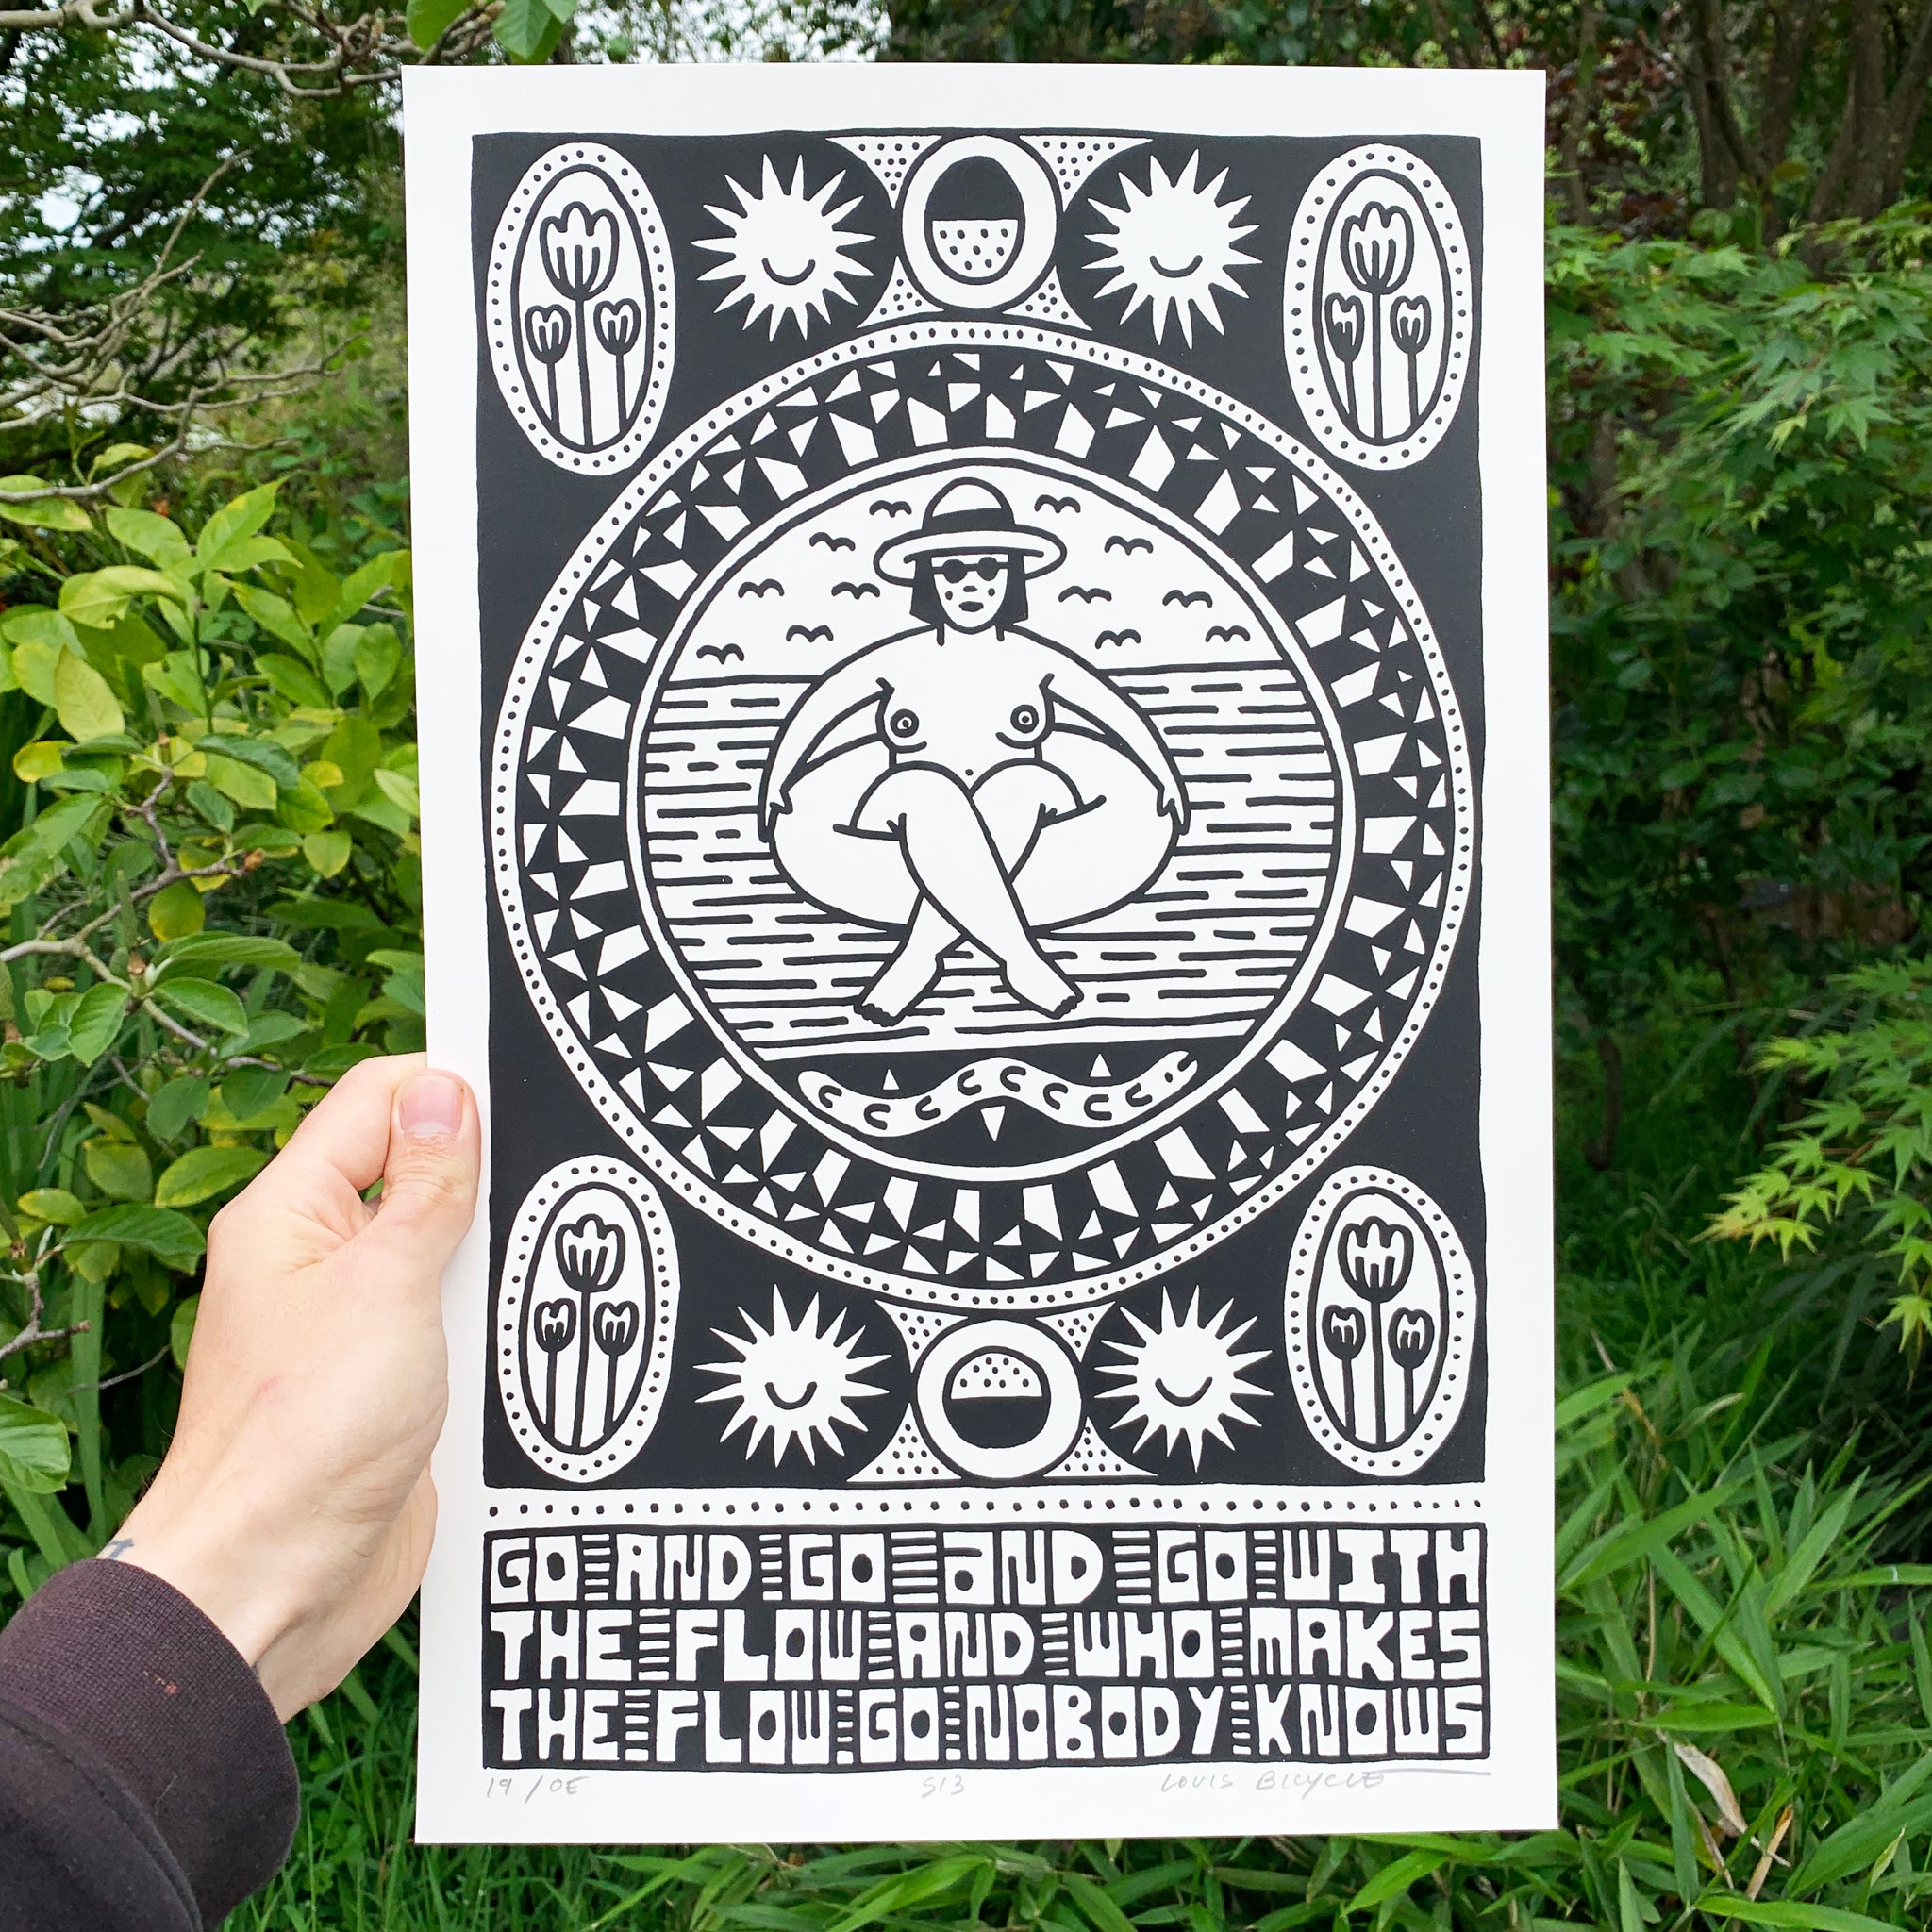 Screen printed poster by artist Louis Bicycle. Naked woman floating in tube.